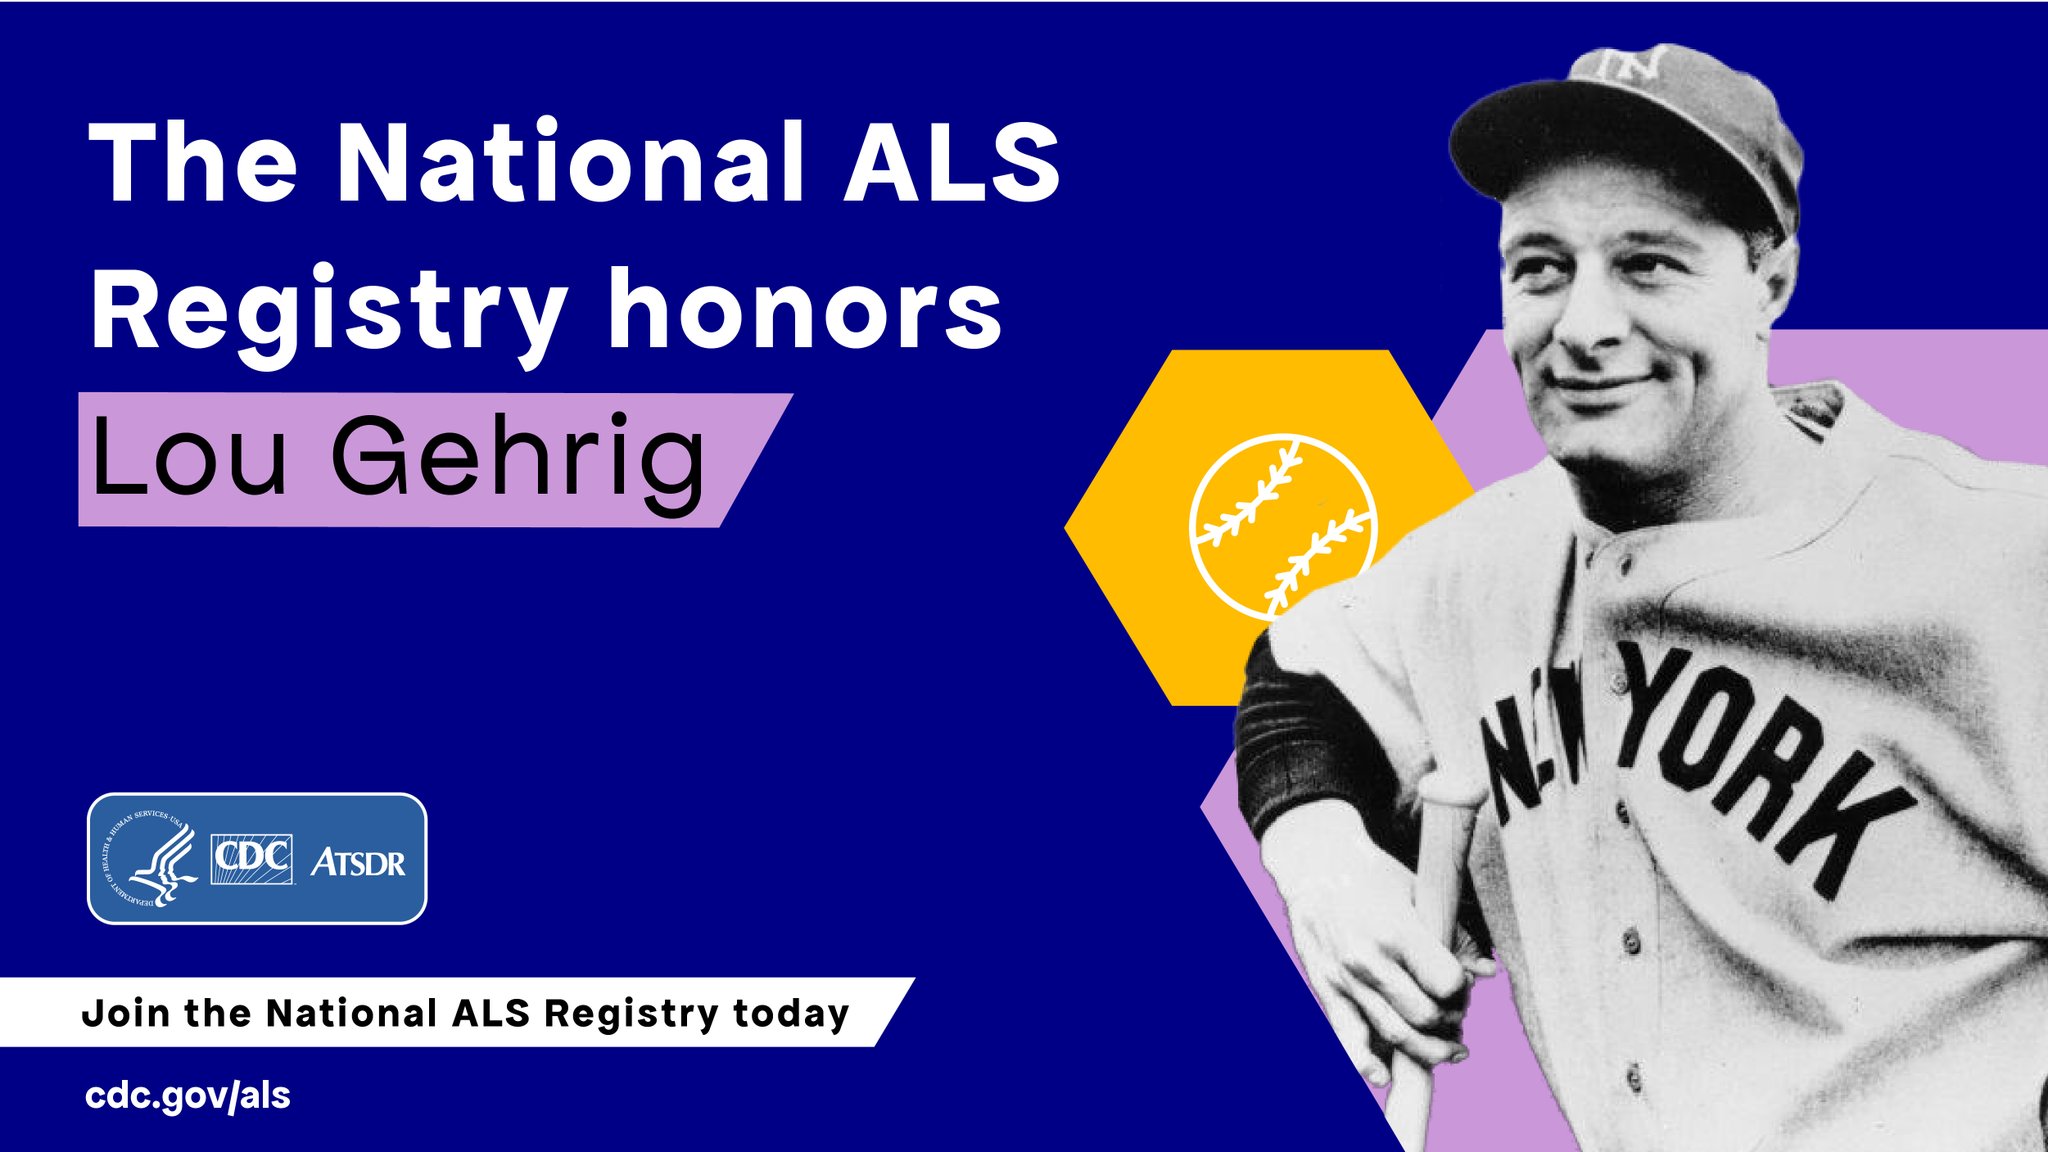 CDC on Twitter "June 2 is now known as “Lou Gehrig Day” across MLB